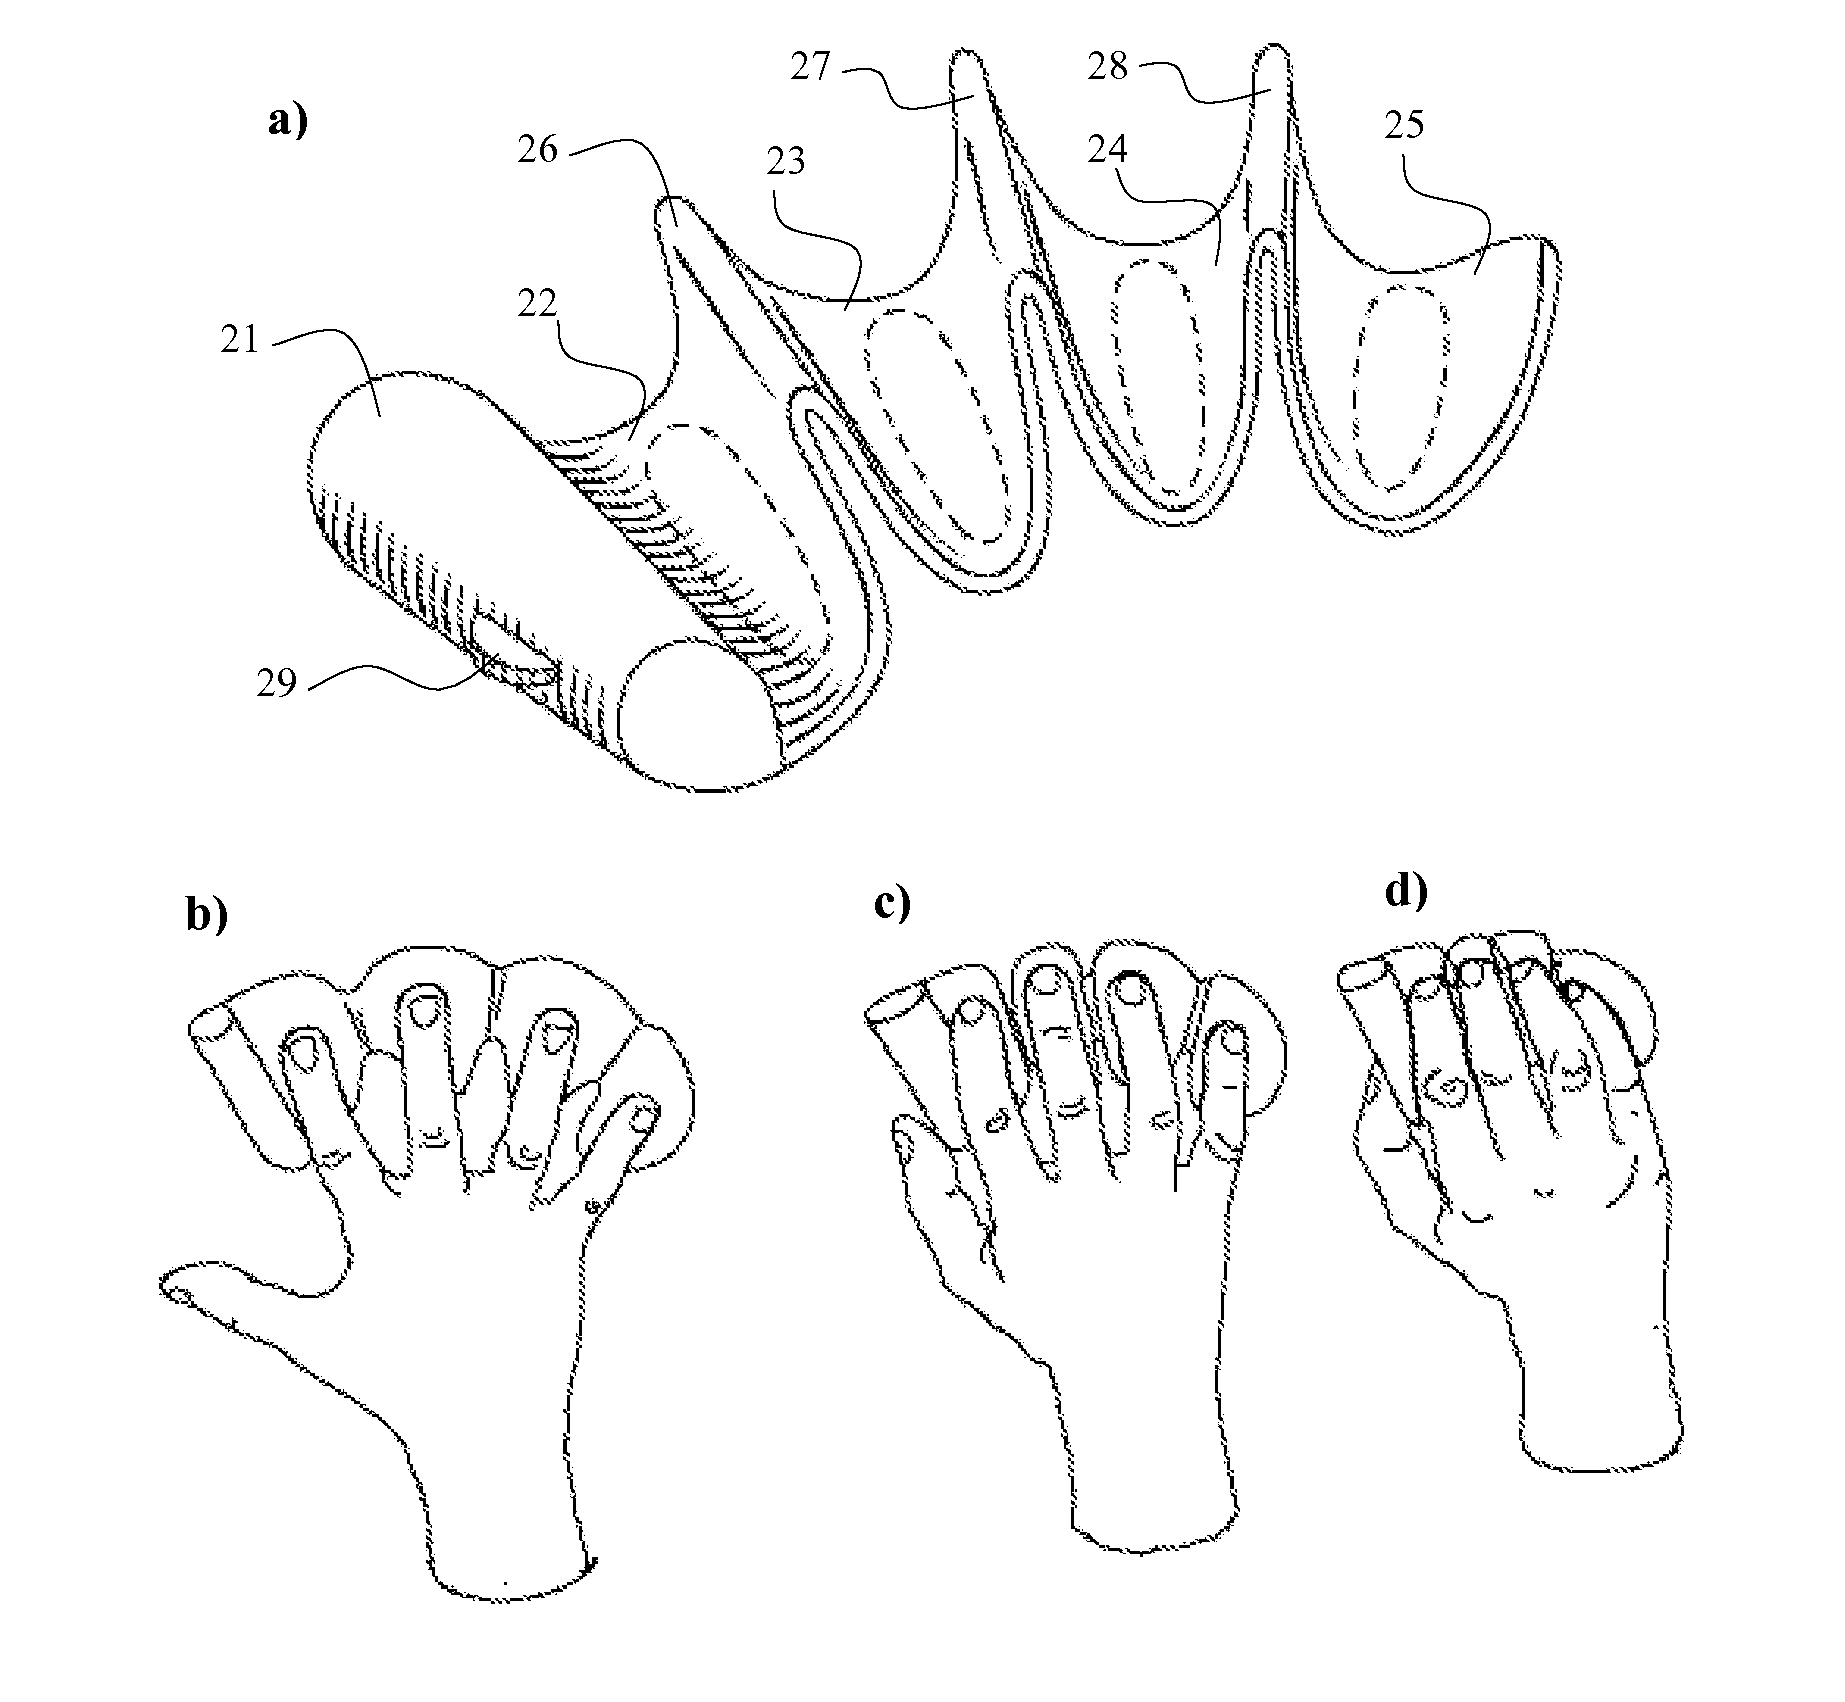 Ergonomic cursor control device that does not assume any specific posture of hand and fingers